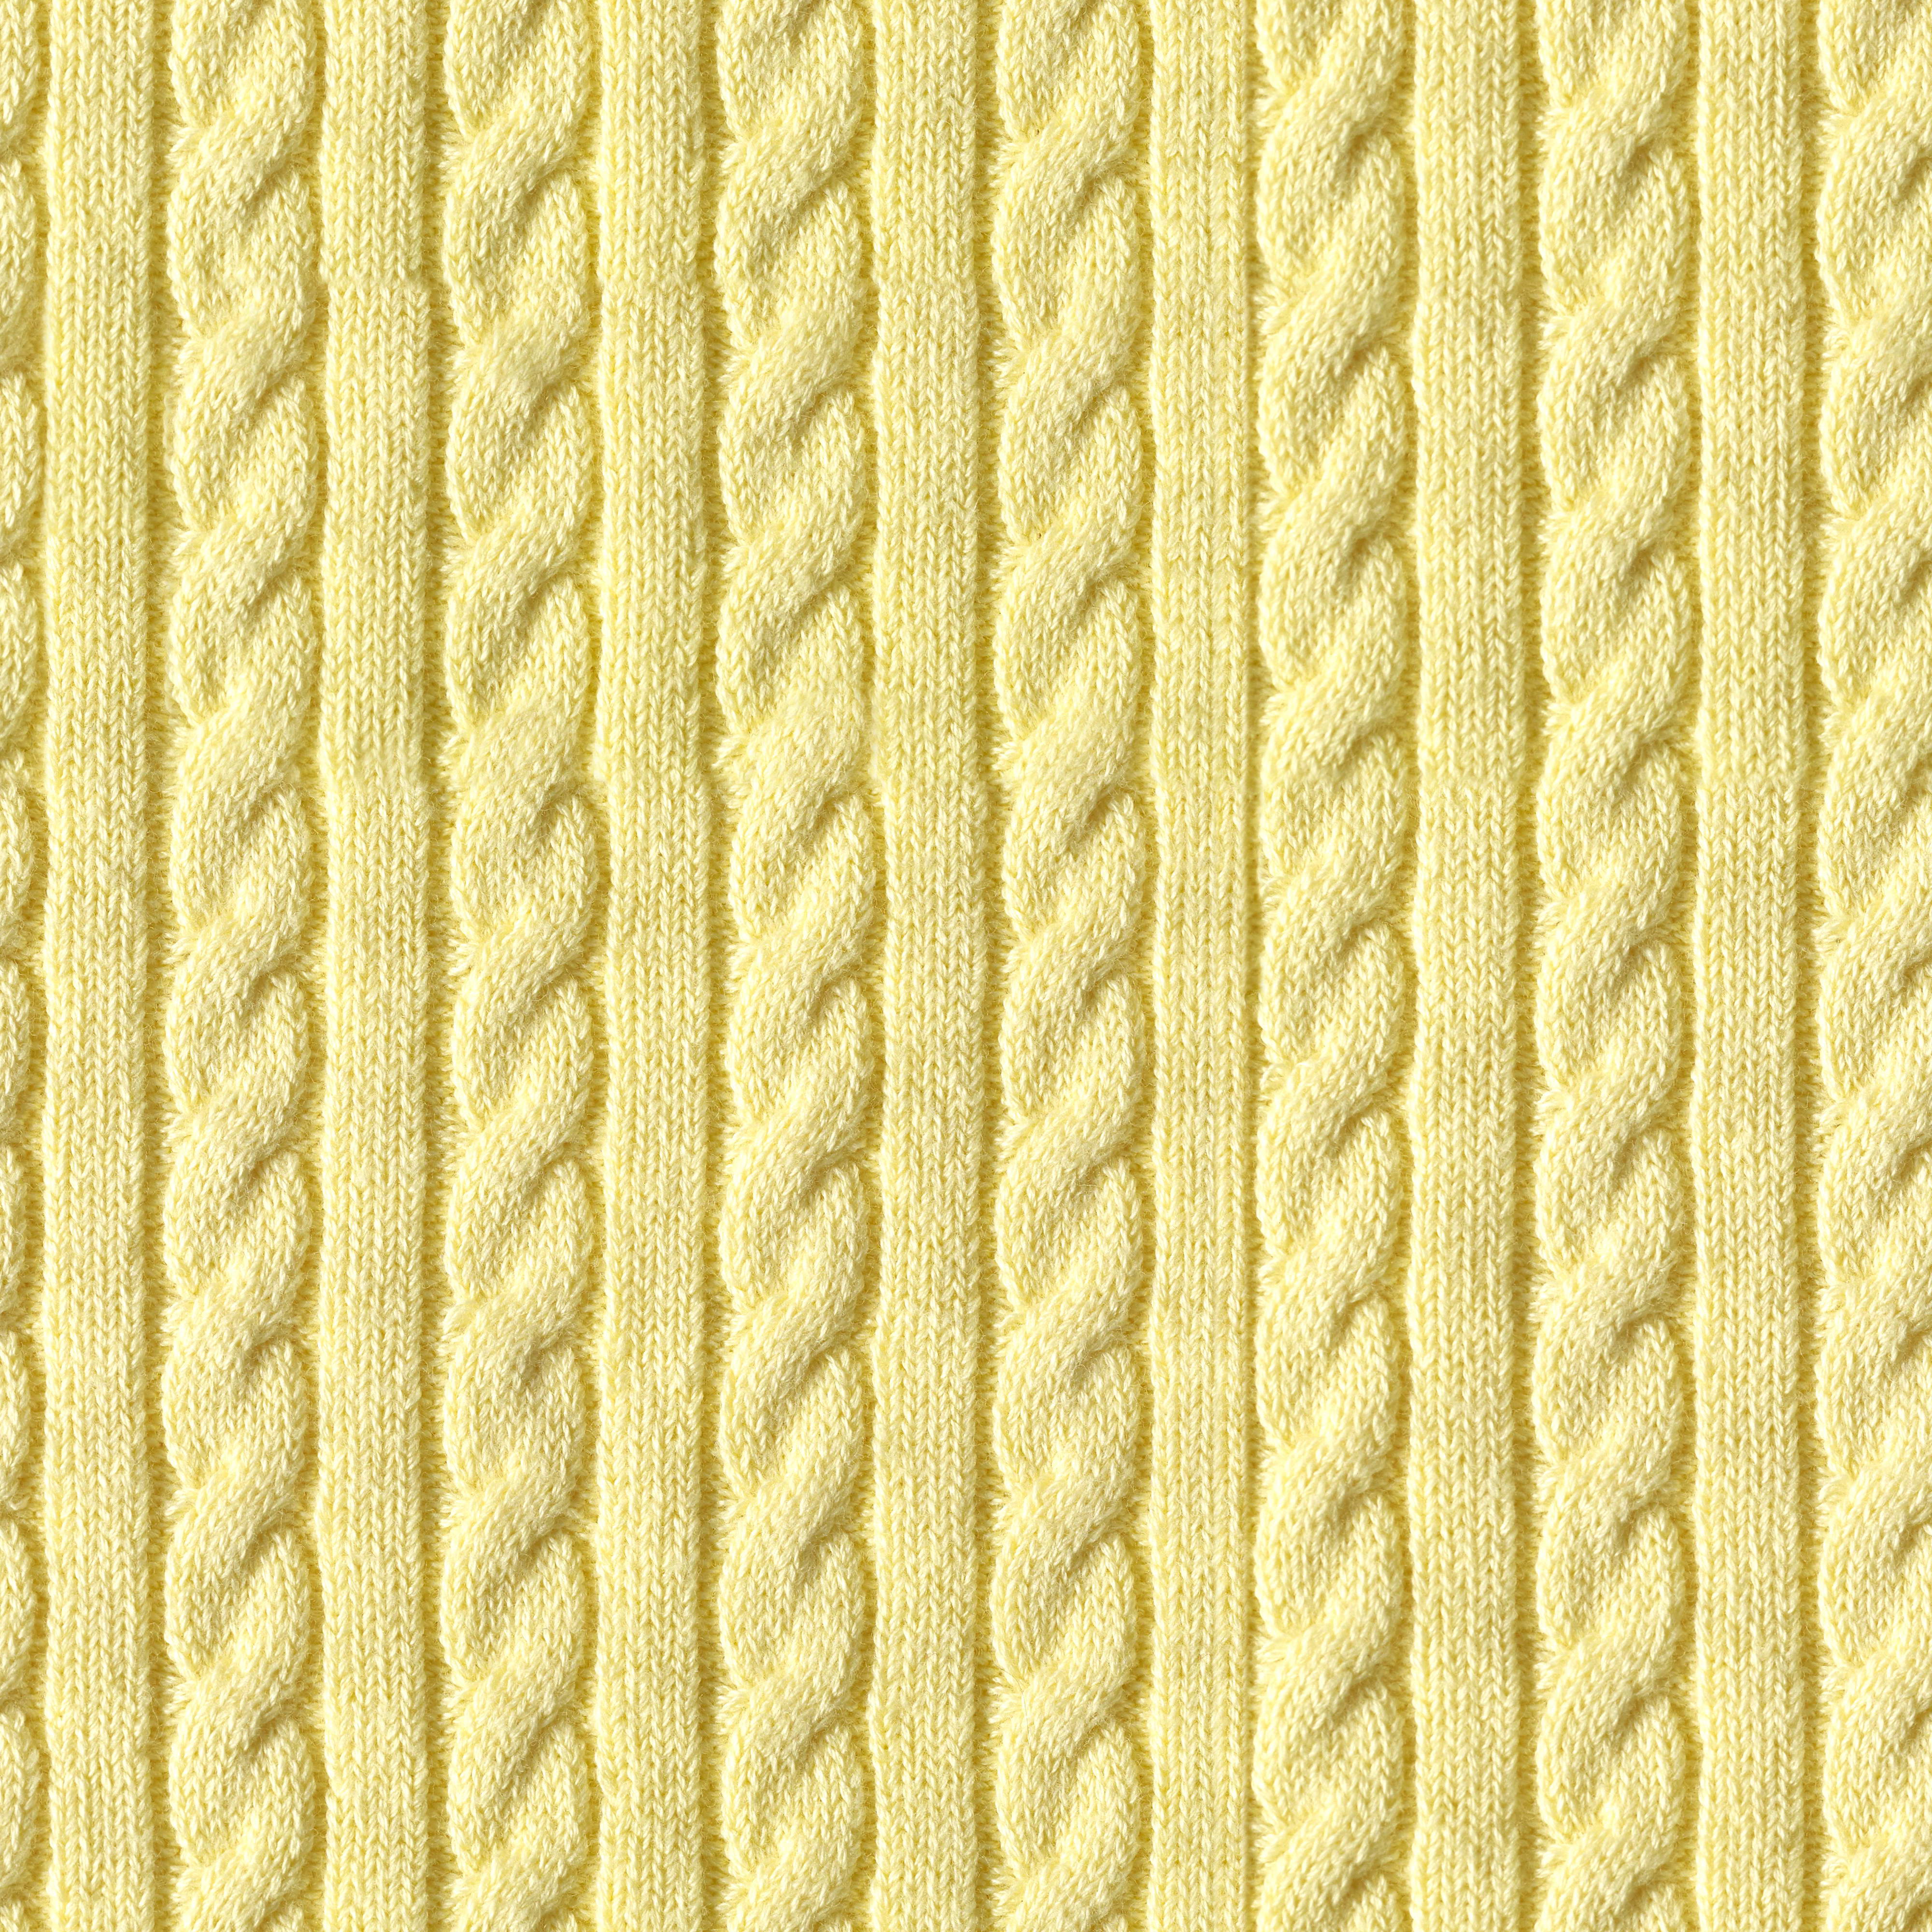 yellow fabric cloth, download photo, background, texture, yellow knitted background texture